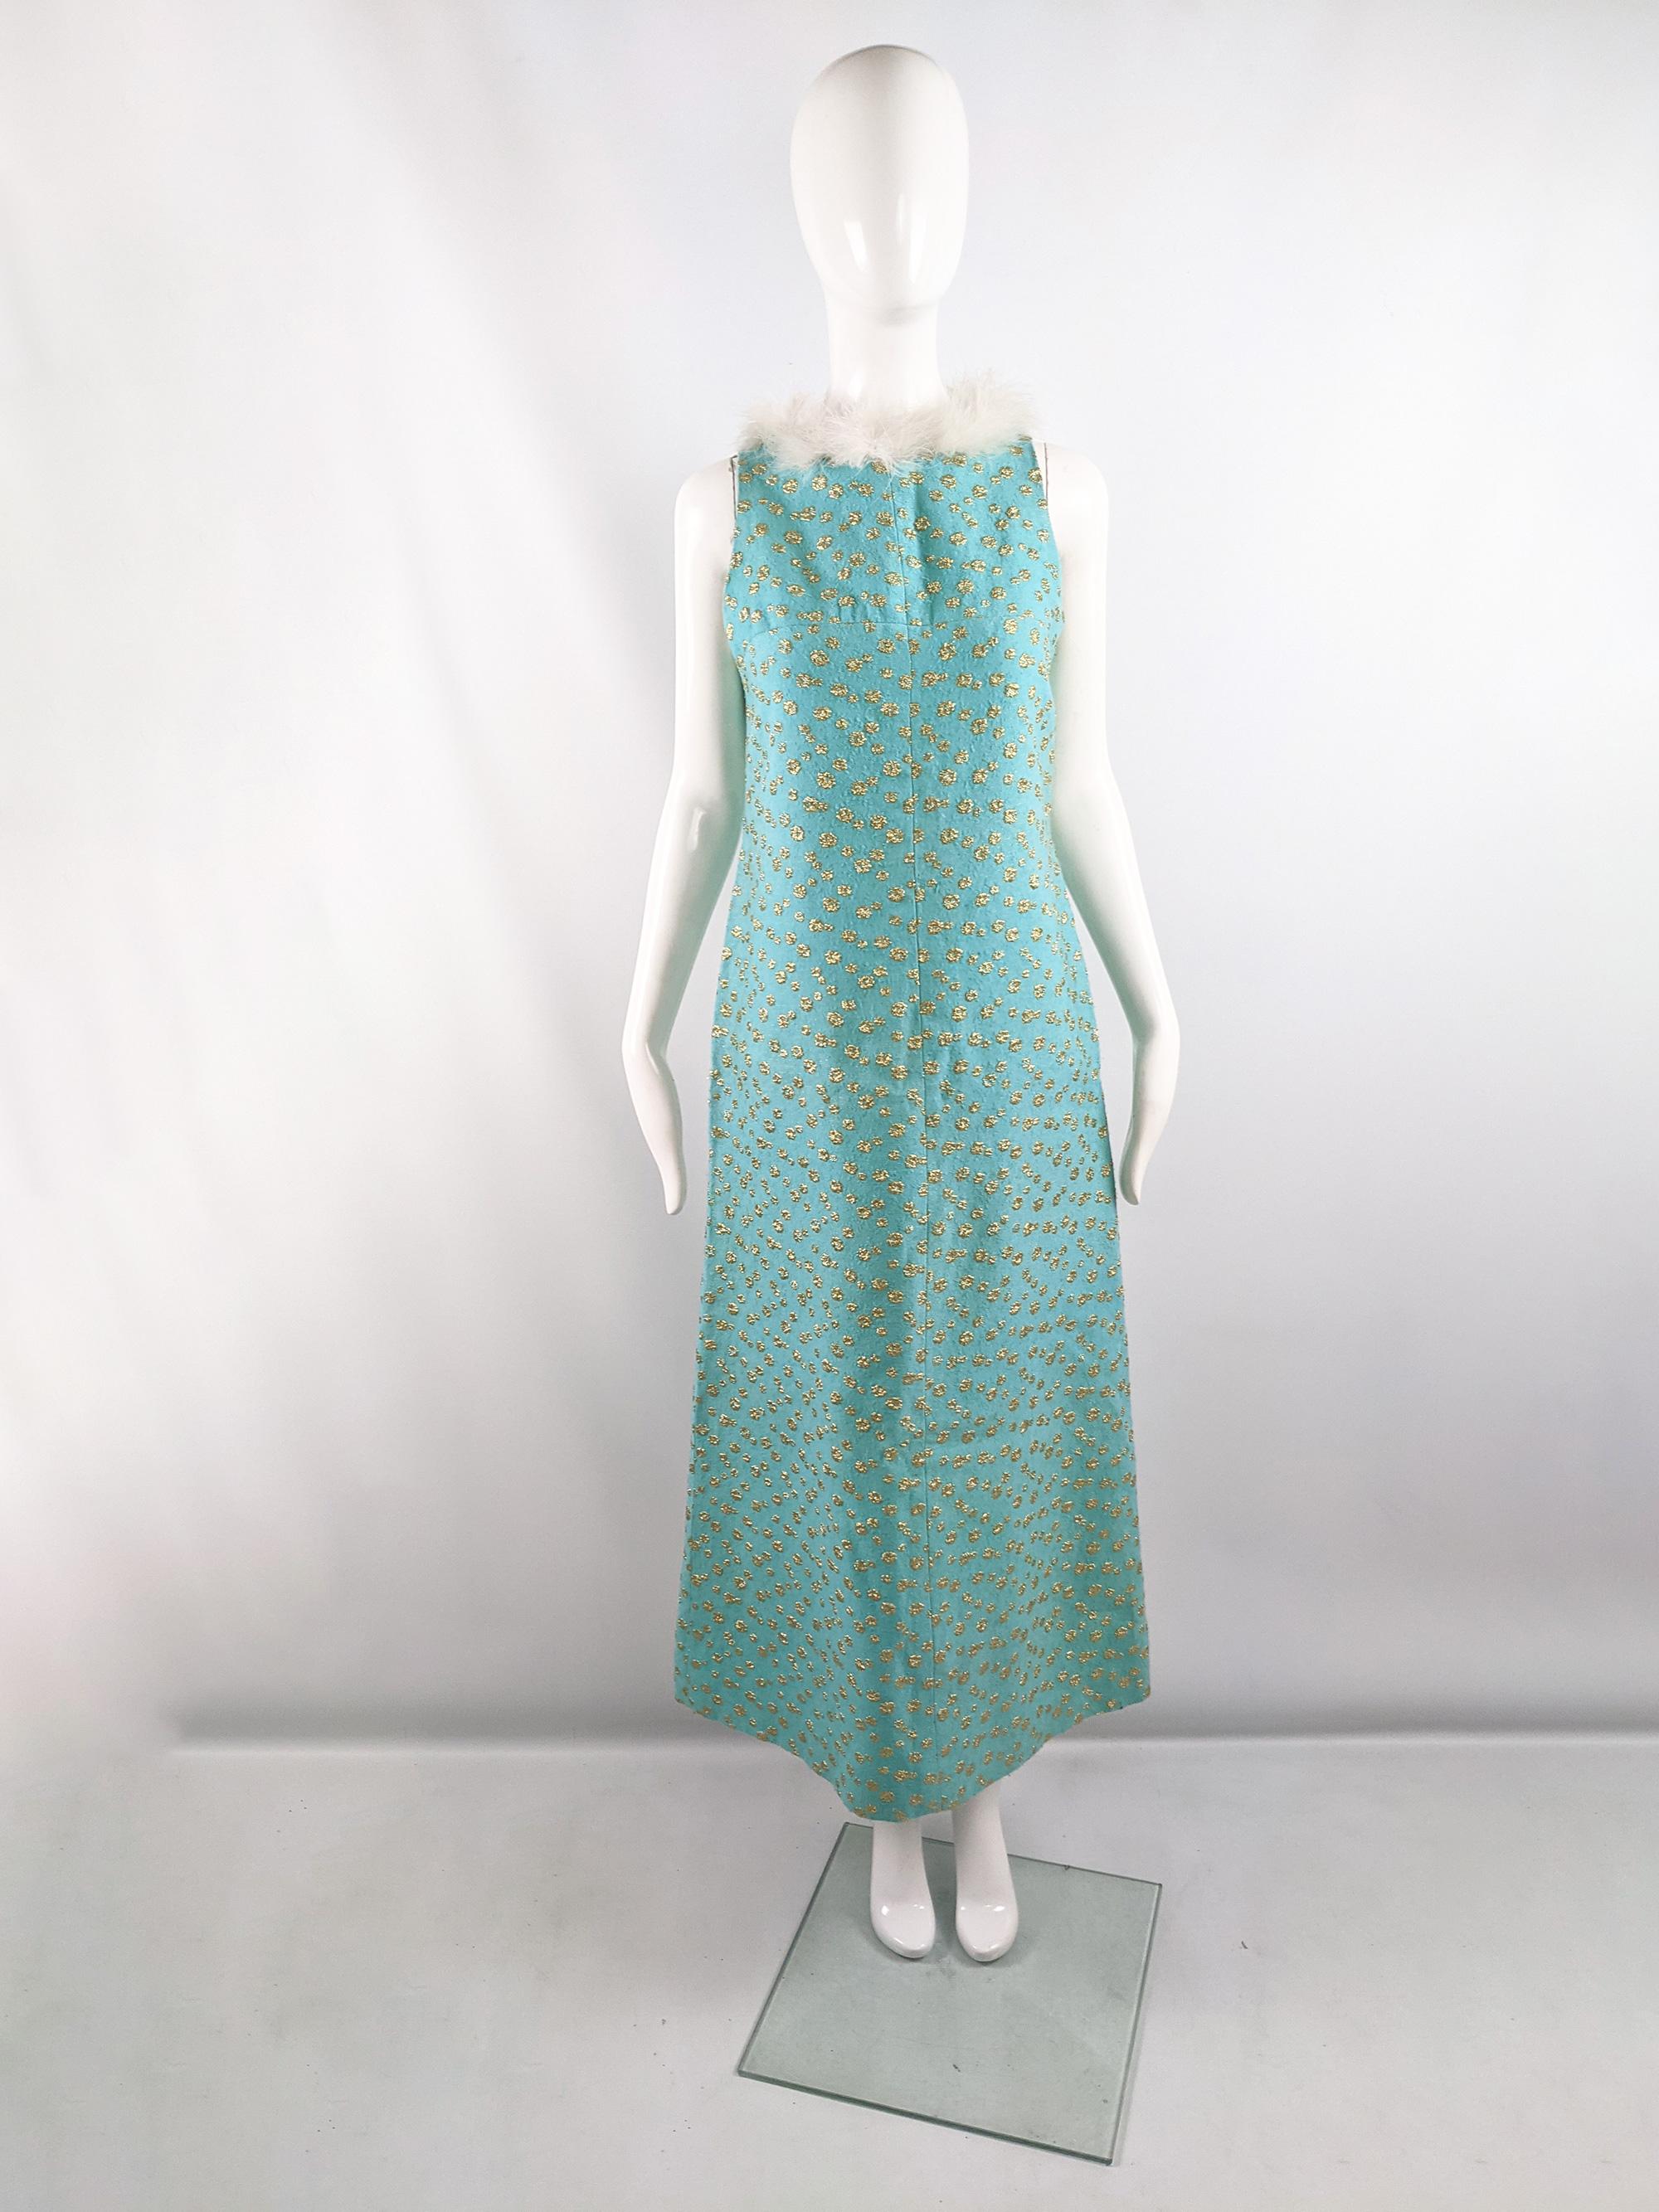 A glamorous vintage maxi sleeveless evening / party dress from the 60s by quality British fashion designer, Alice Edwards. In a turquoise and gold brocade fabric with a white feather trim. In a column / long A-line shape that gives a glamorous mod